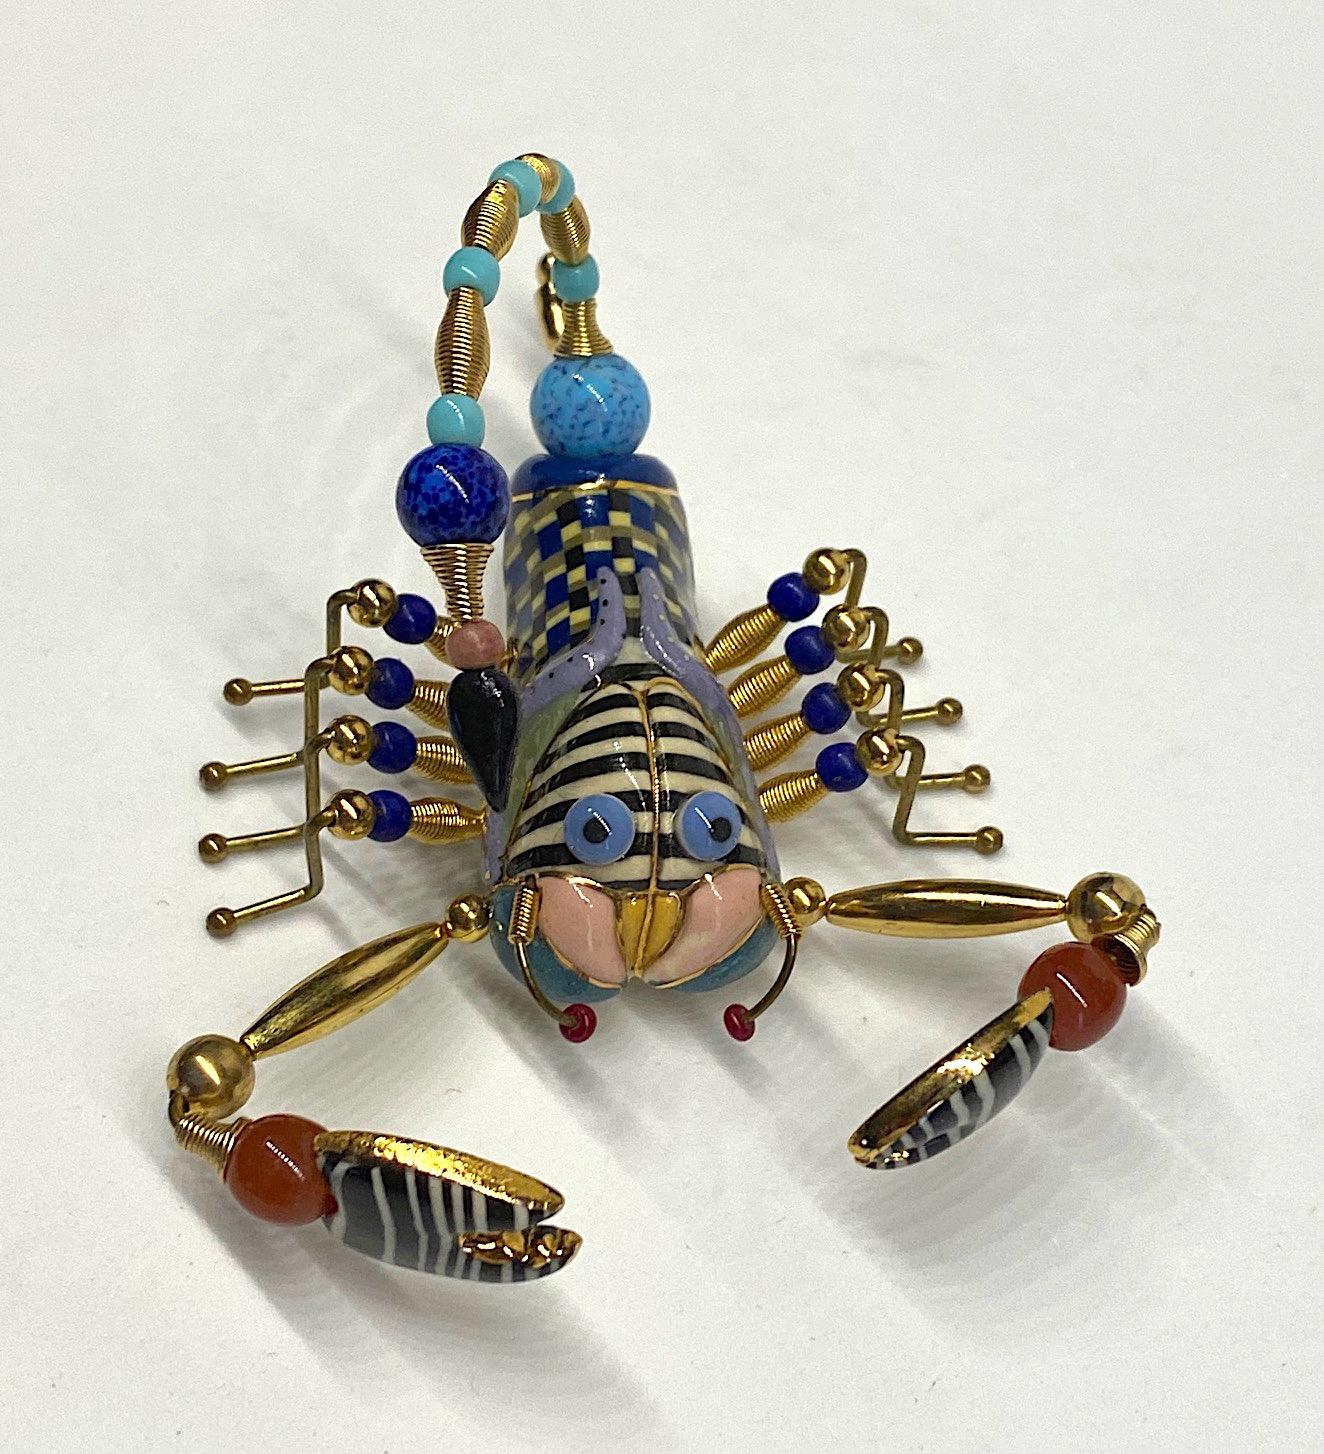 A one of kind hand made scorpion brooch from the company Jewelry 10. Always with a sense of whimsy, Jewelry 10 pieces designed by Cynthia Chuang and her husband Erh-Ping Tsai are highly collected and displayed. The scorpion porcelain body is